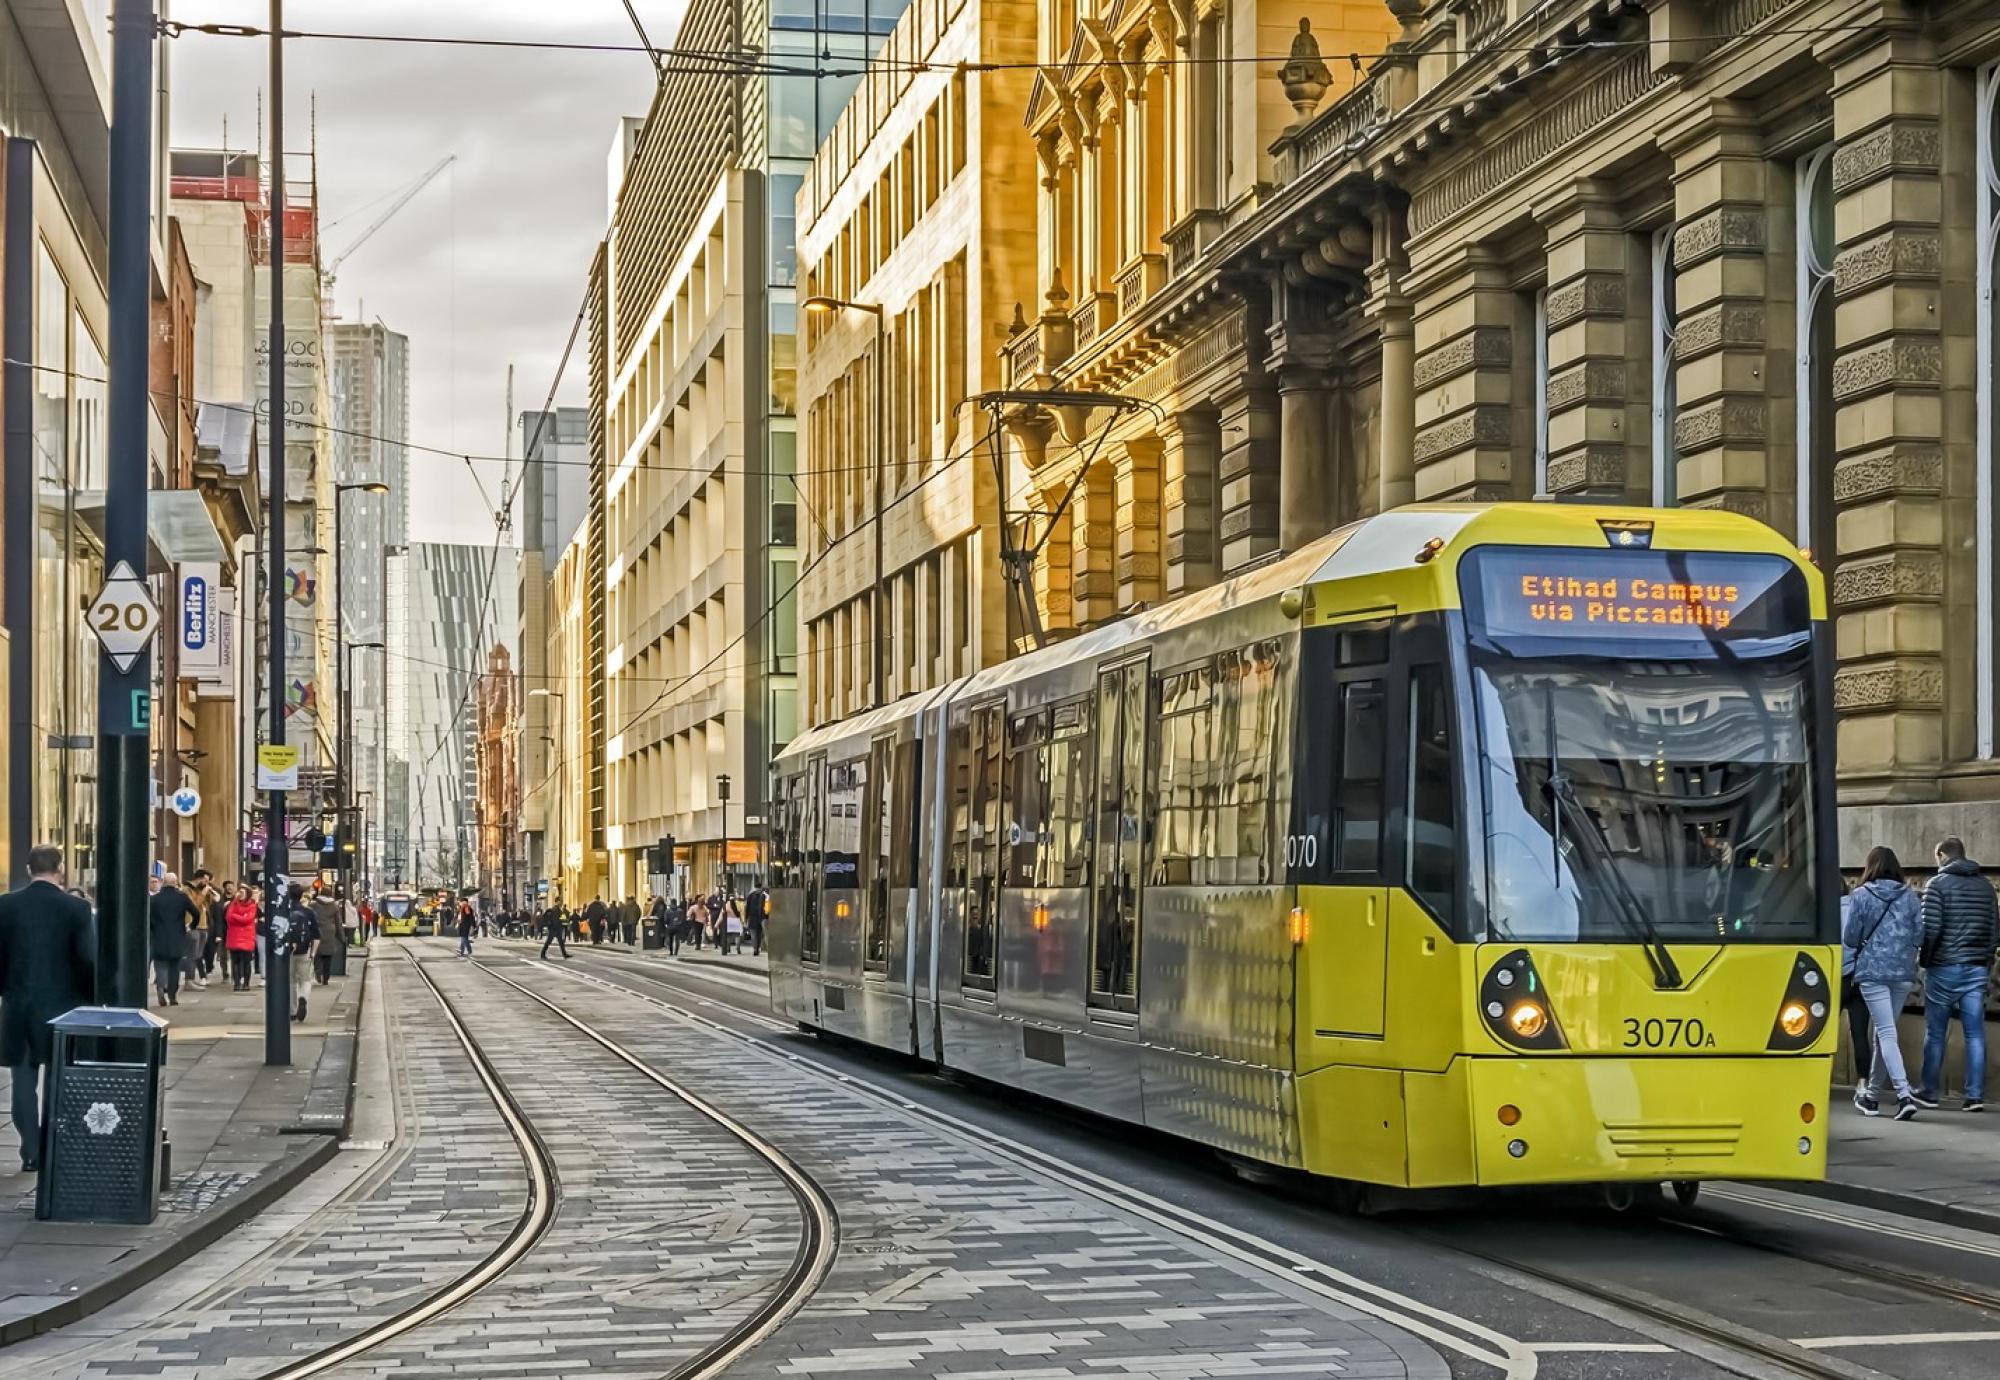 View of Manchester city centre, UK. A tram can be seen approaching and people can be seen walking on the roads.